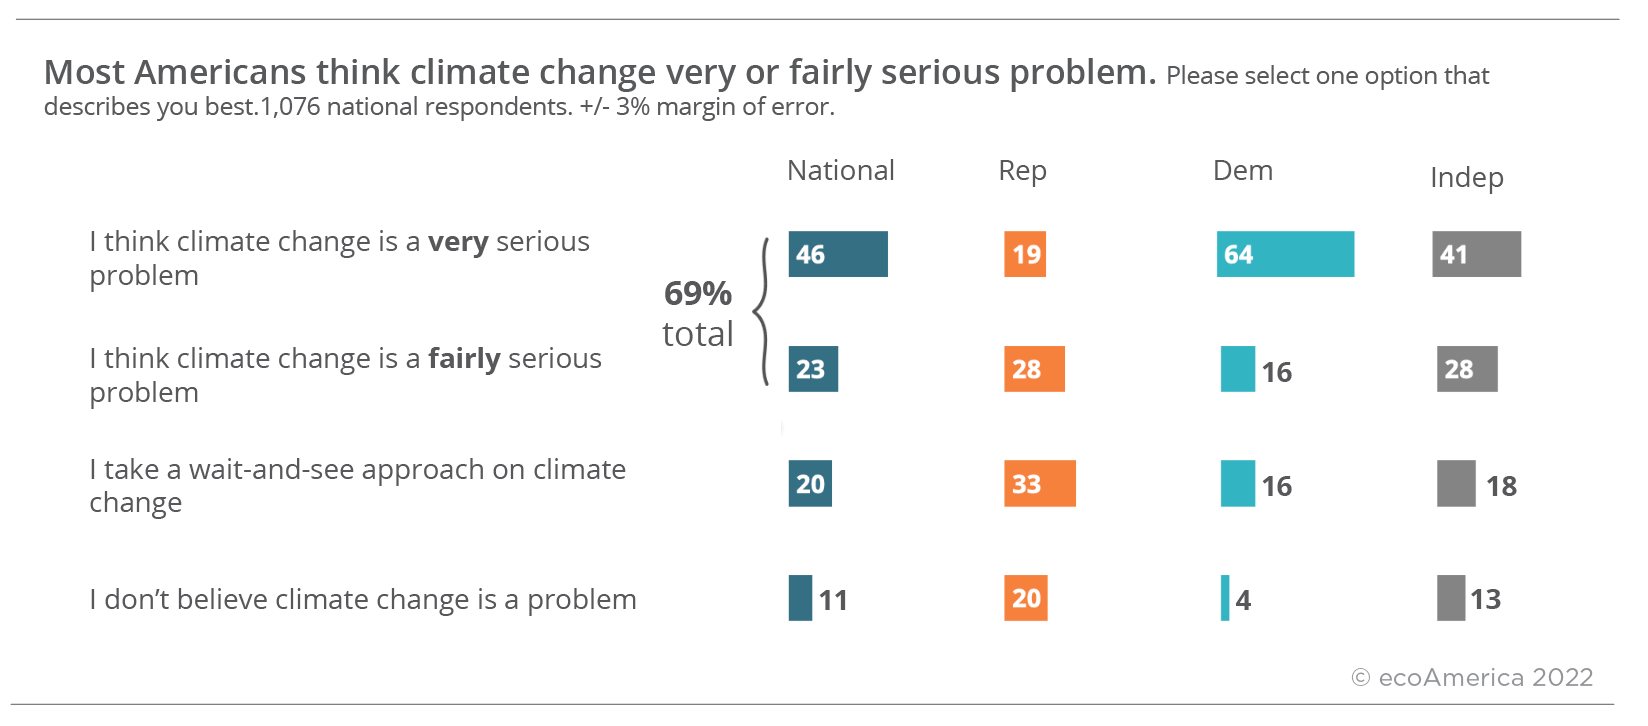 This chart shows that nationally, 46% of Americans think climate change is a very serious problem, 23% think it’s a fairly serious problem, 20% take a wait-and-see approach on climate change, and 11% don’t believe climate change is a problem. 19% of Republicans think climate change is a very serious problem, 28% think it’s a fairly serious problem, 33% take a wait-and-see approach on climate change and 20% don’t believe climate change is a problem. 64% of Democrats think climate change is a very serious problem, 16% think climate change is a fairly serious problem, 16% take a wait-and-see approach on climate change, and 4% don’t believe climate change is a problem. 41% of Independents think climate change is a very serious problem, 28% think climate change is a fairly serious problem, 18% take a wait-and-see approach on climate change, and 13% don’t believe climate change is a problem.